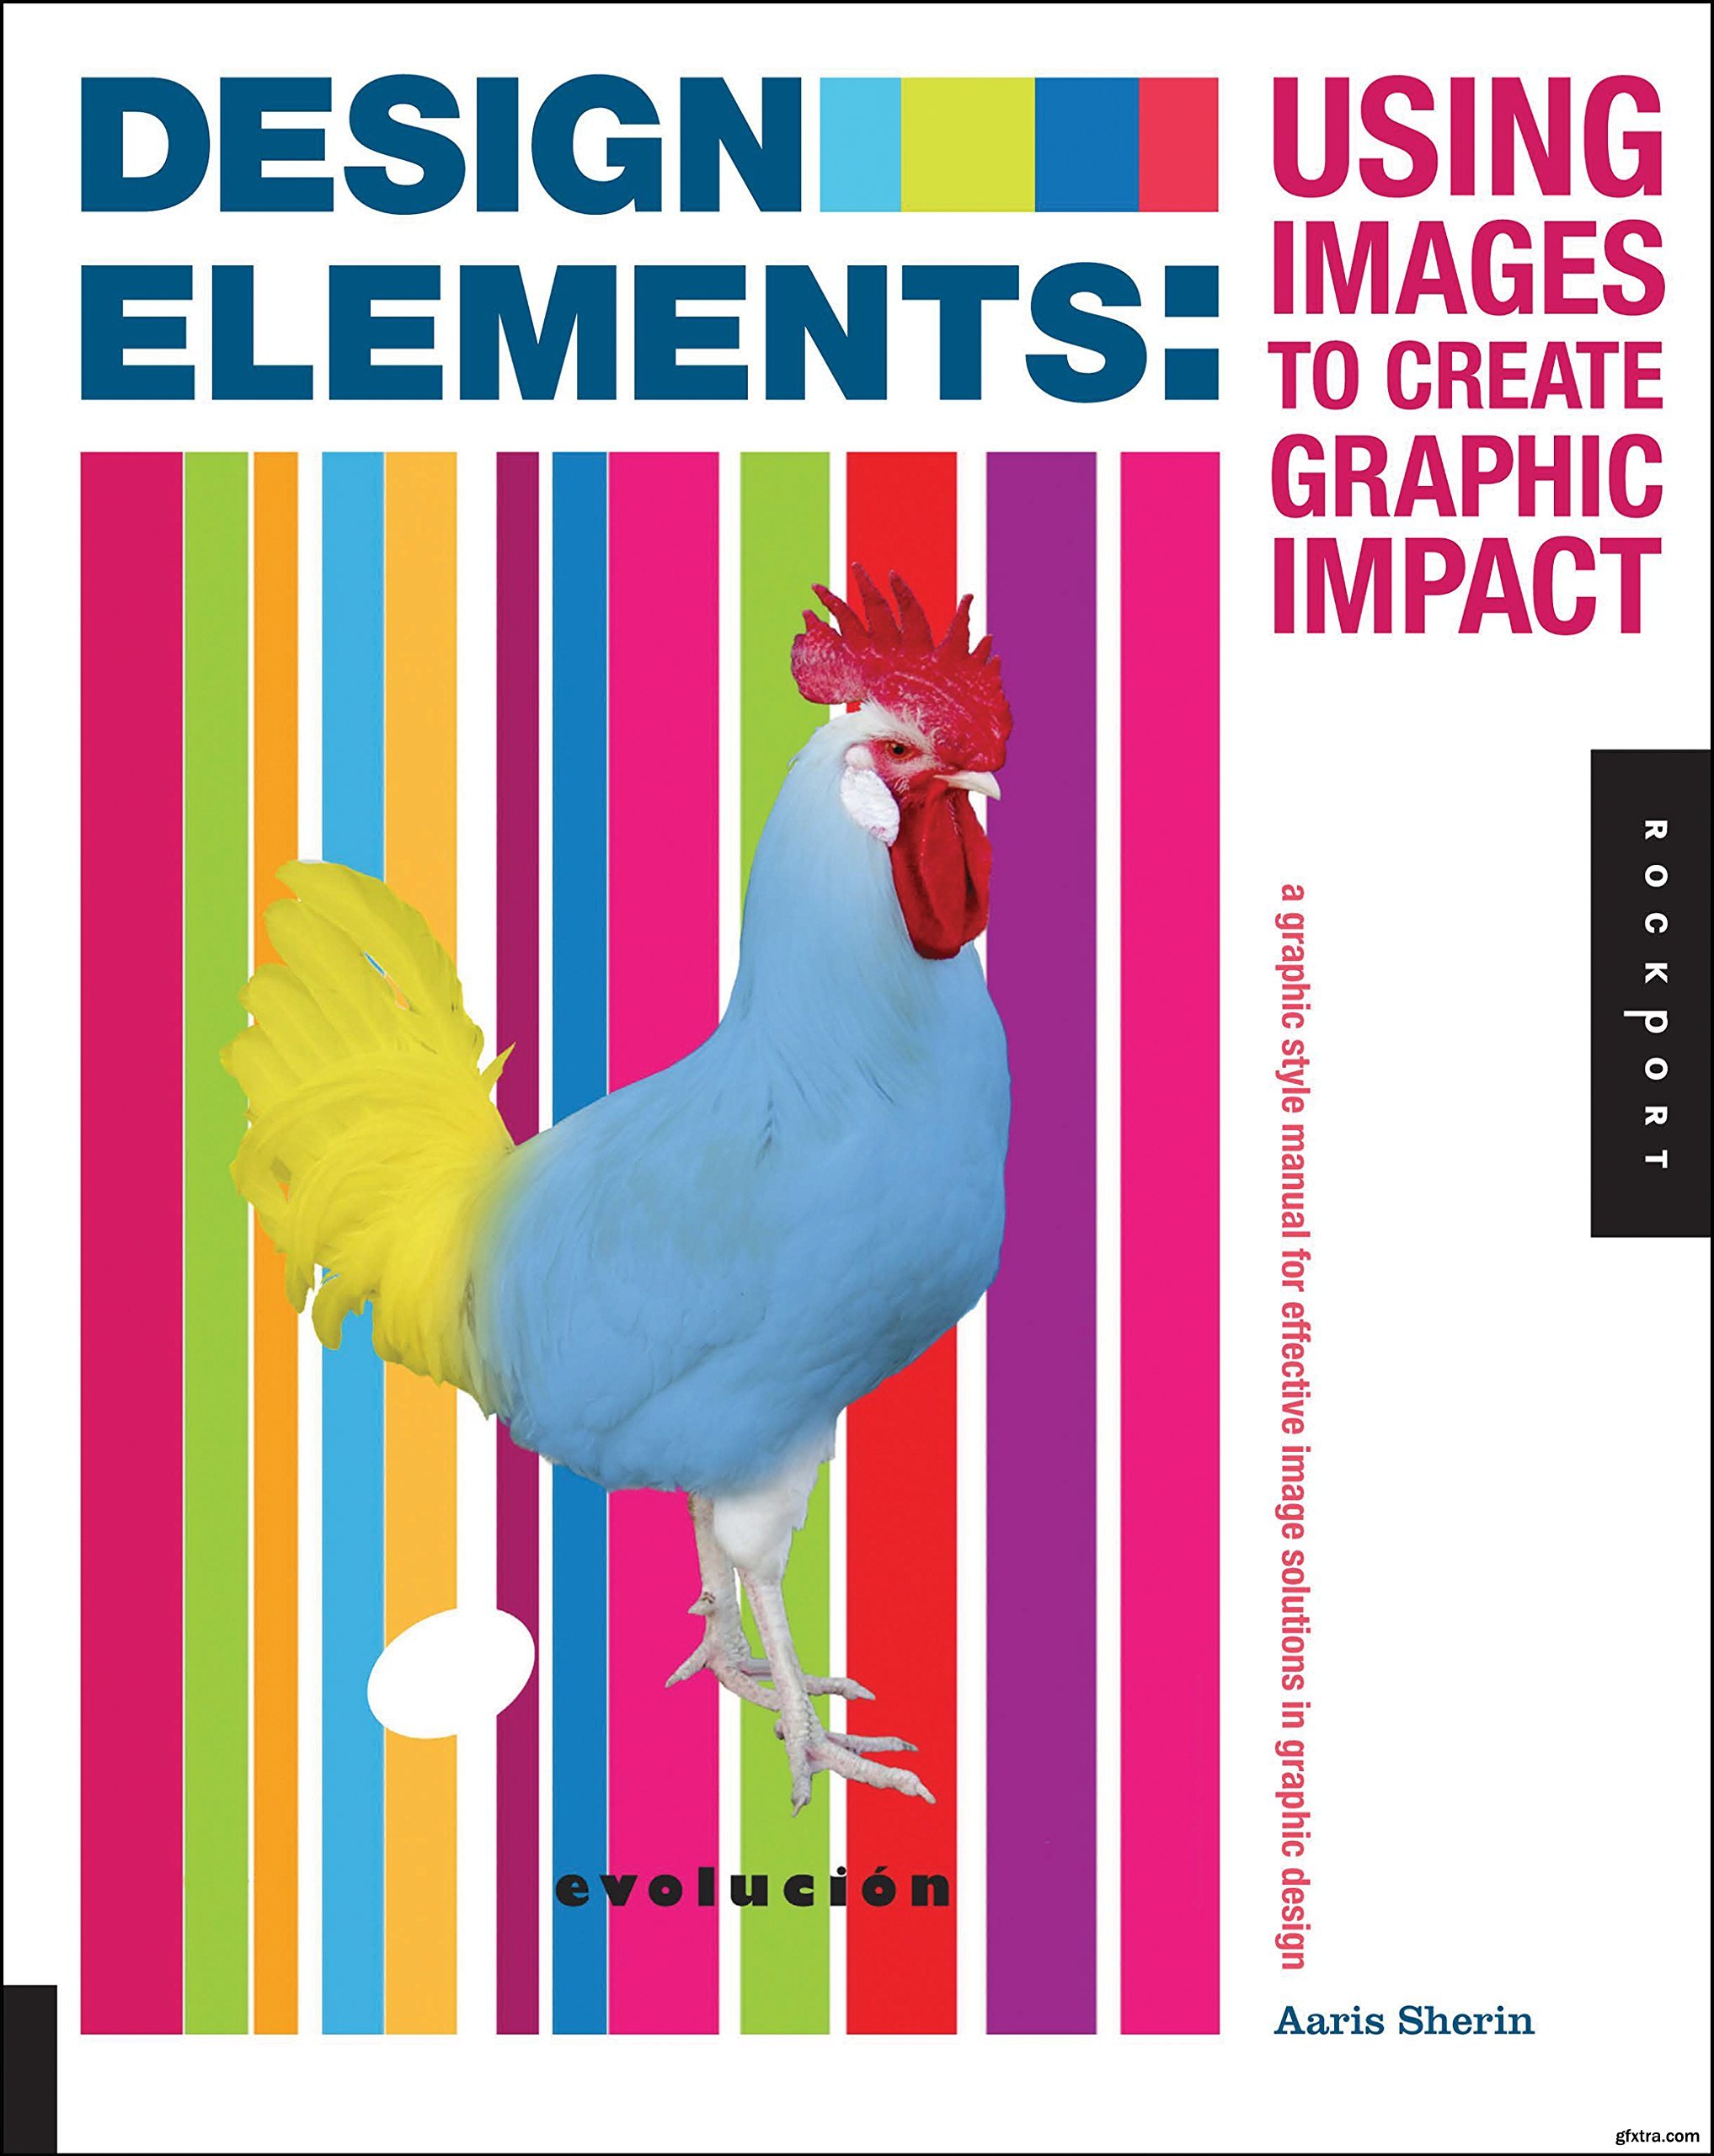 Design Elements, Using Images to Create Graphic Impact » GFxtra